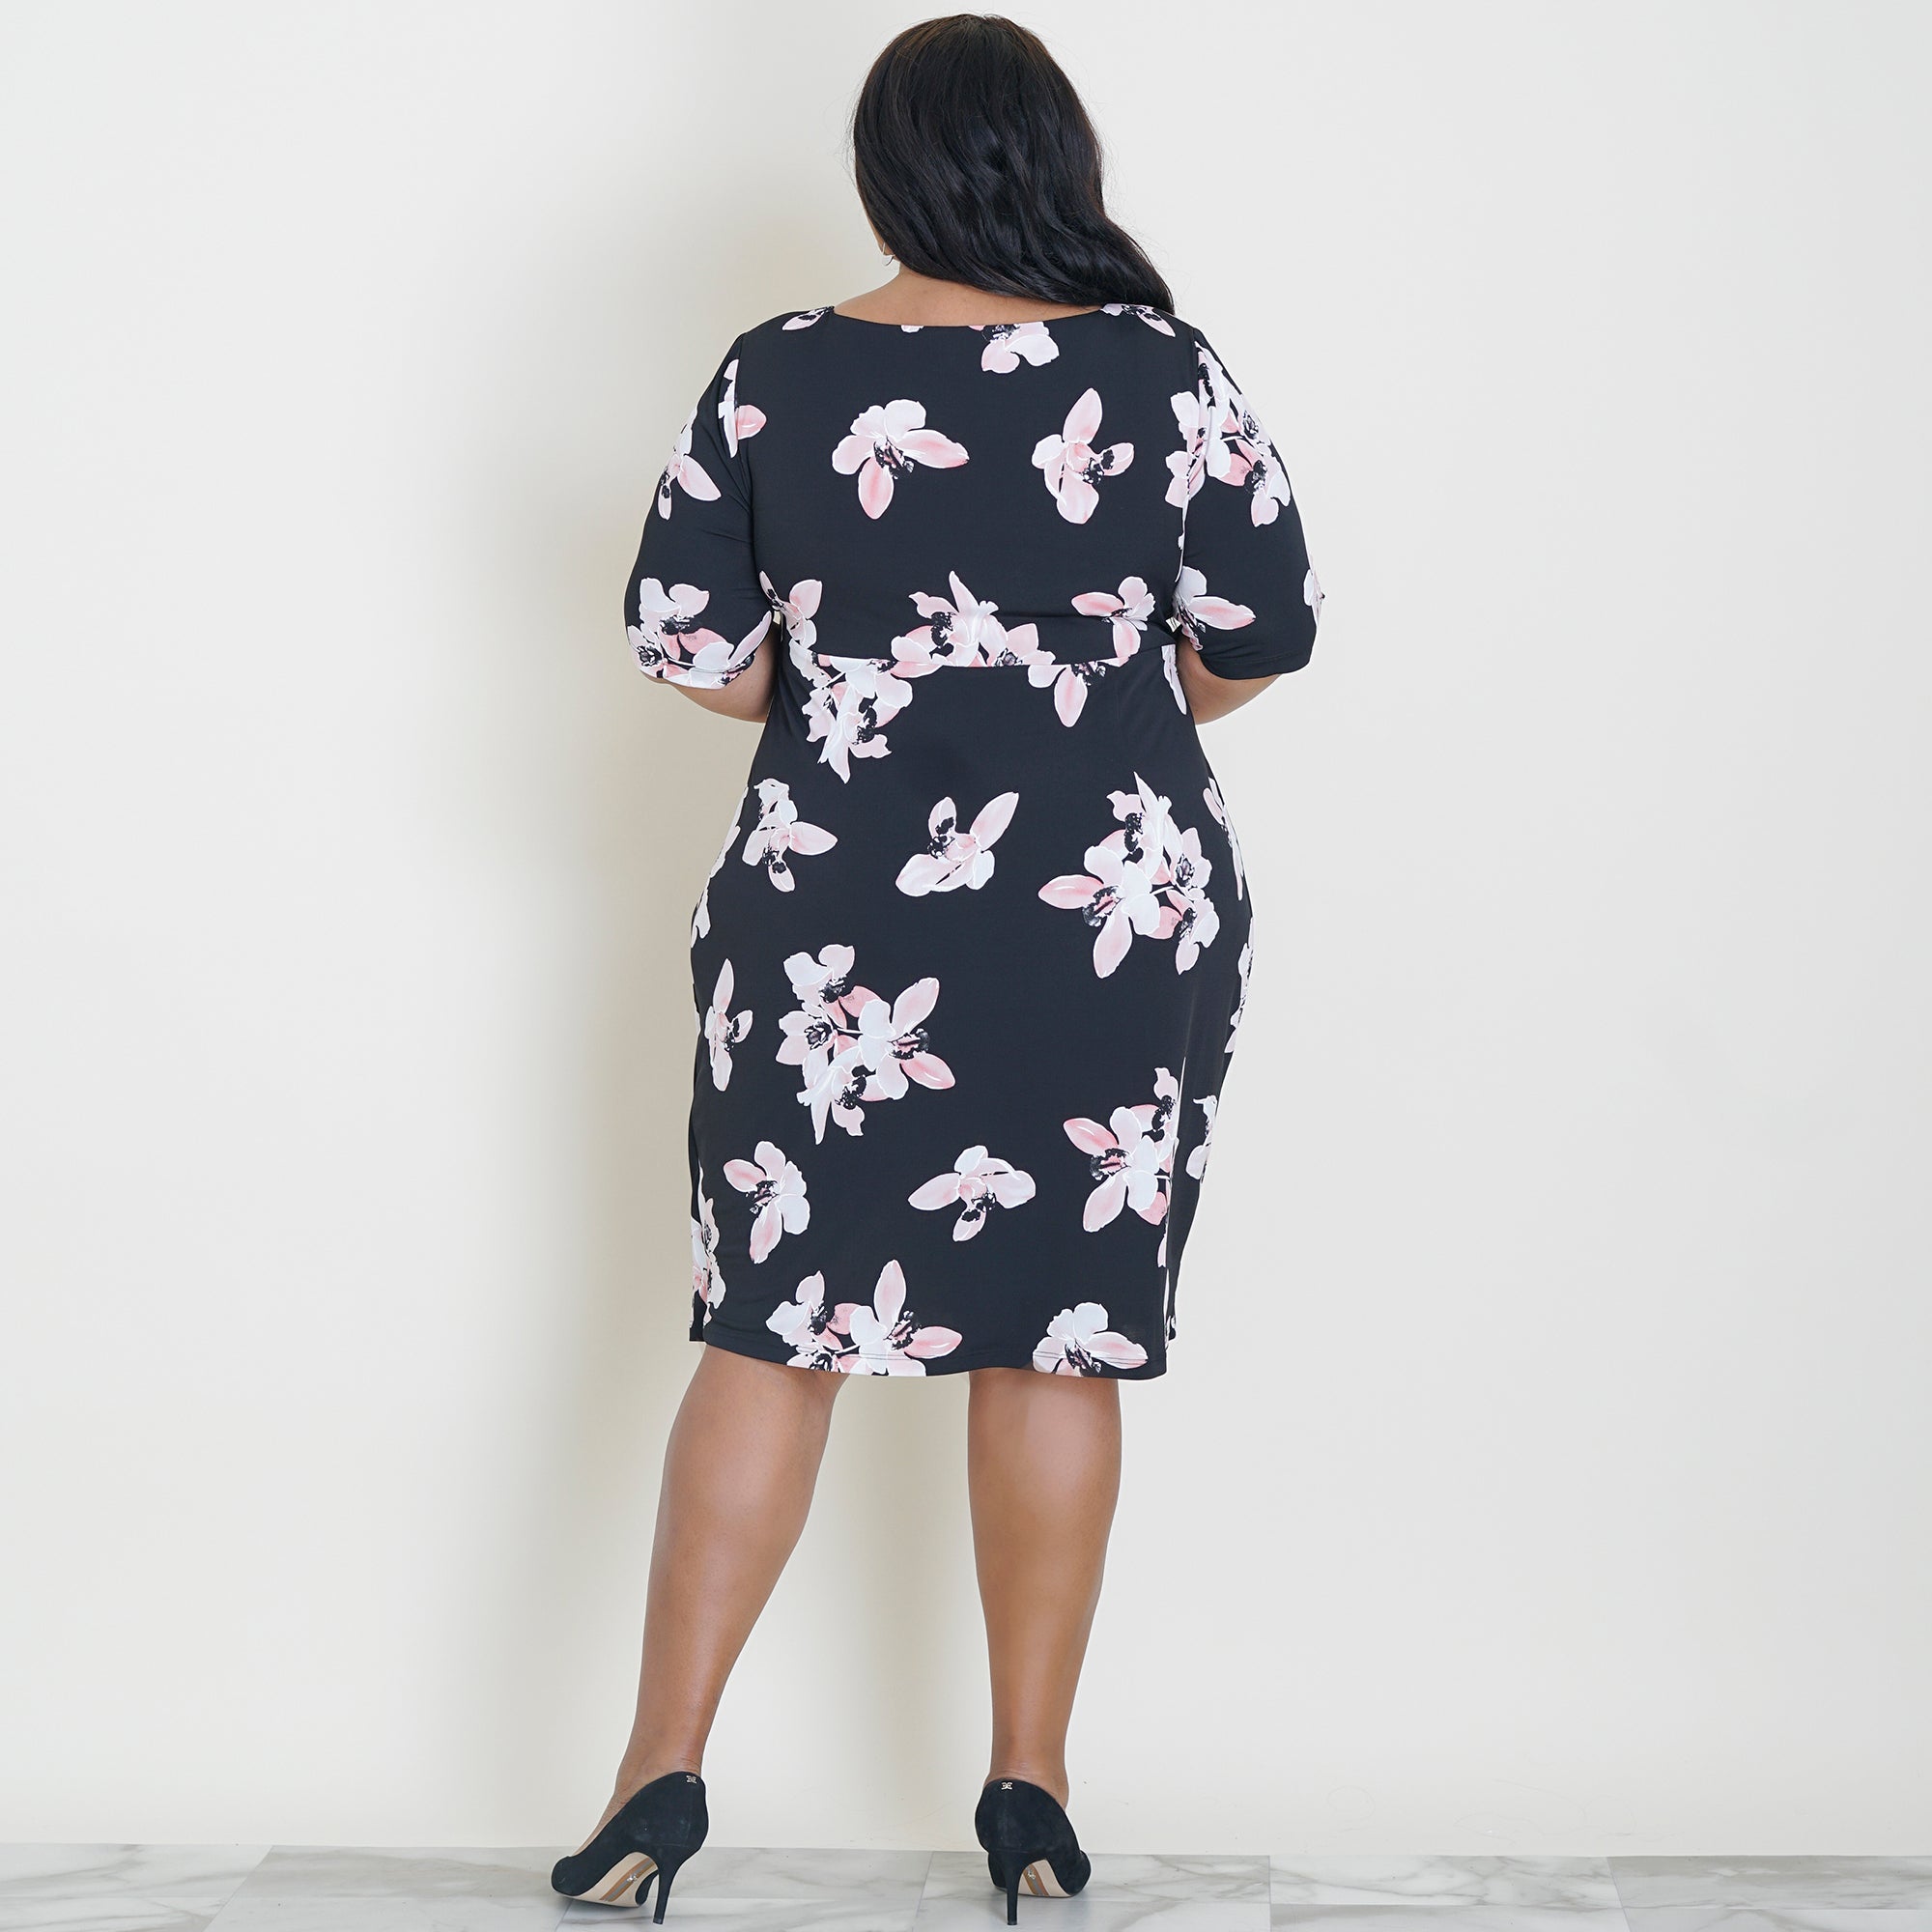 Woman posing wearing Cameo Lisa Cameo Floral Elbow Sleeve Dress from Connected Apparel